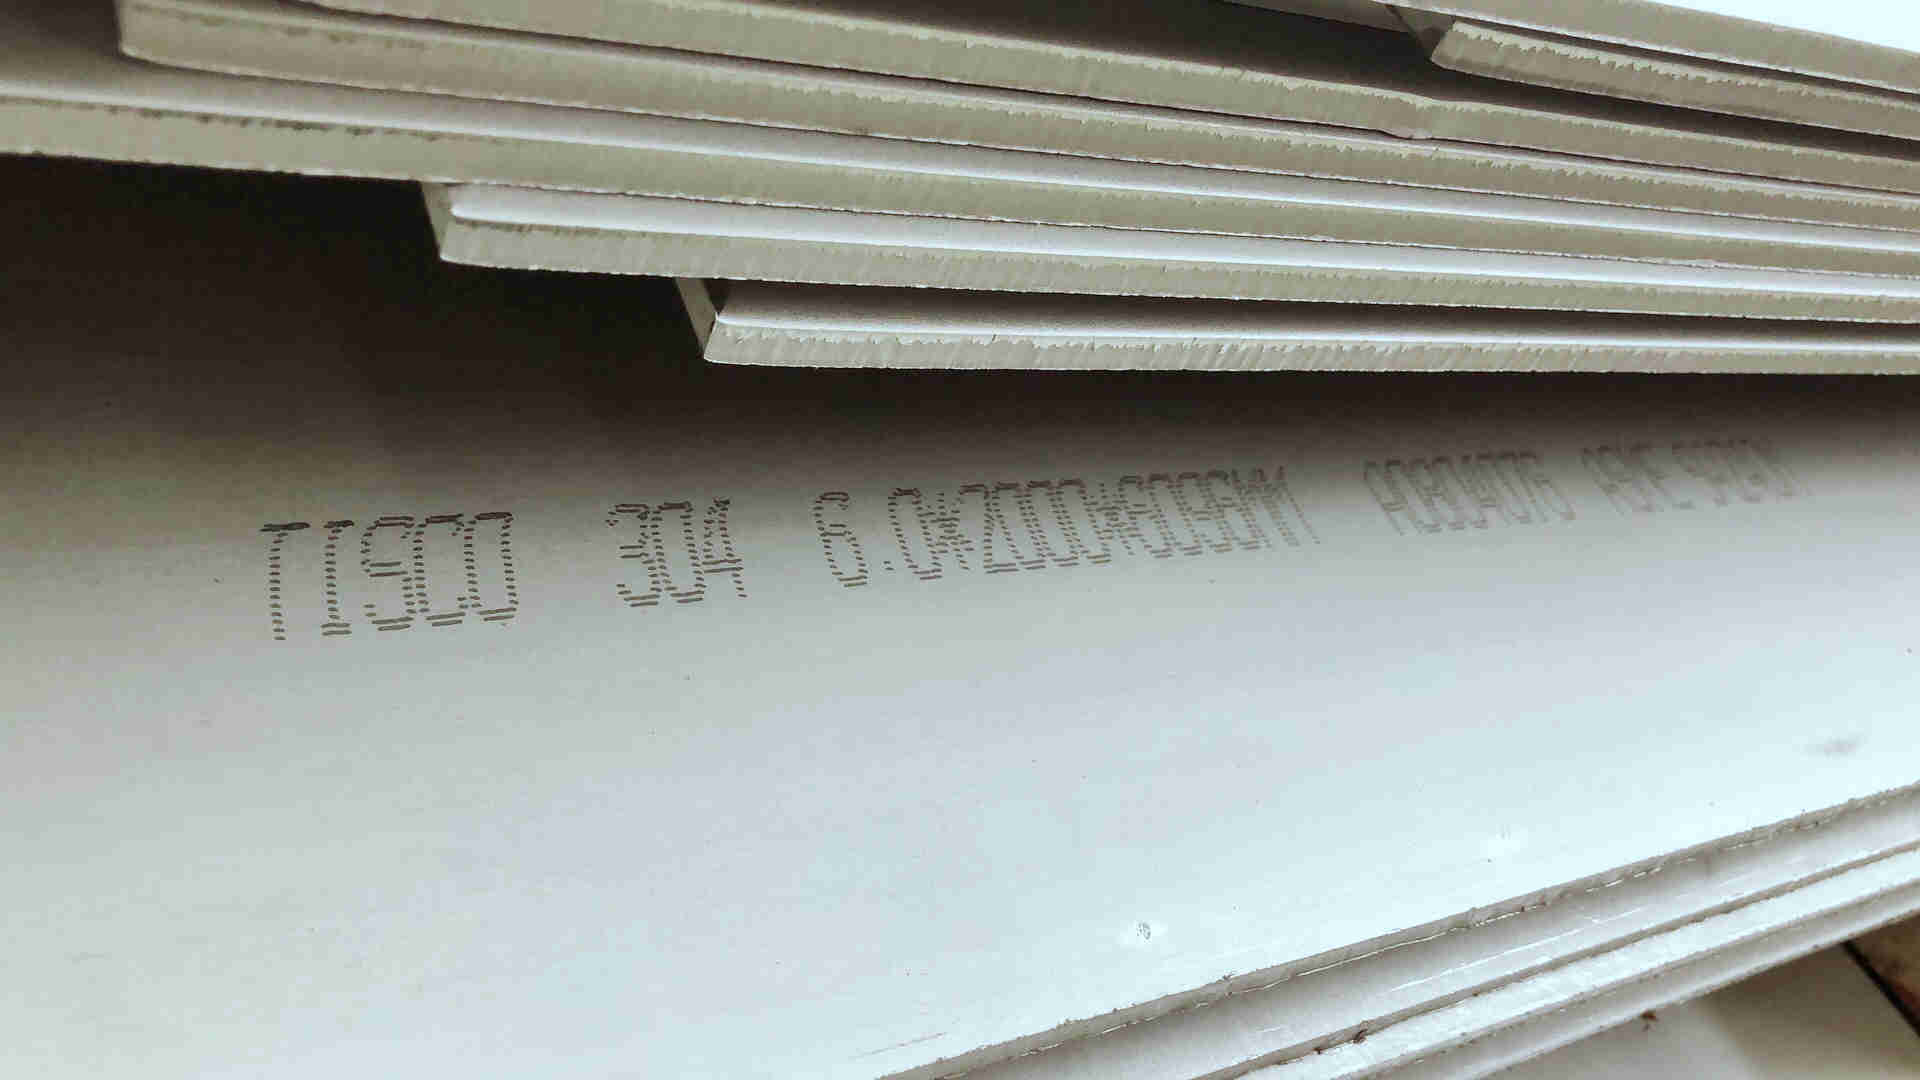 A240 density of 316l stainless steel plate stockist